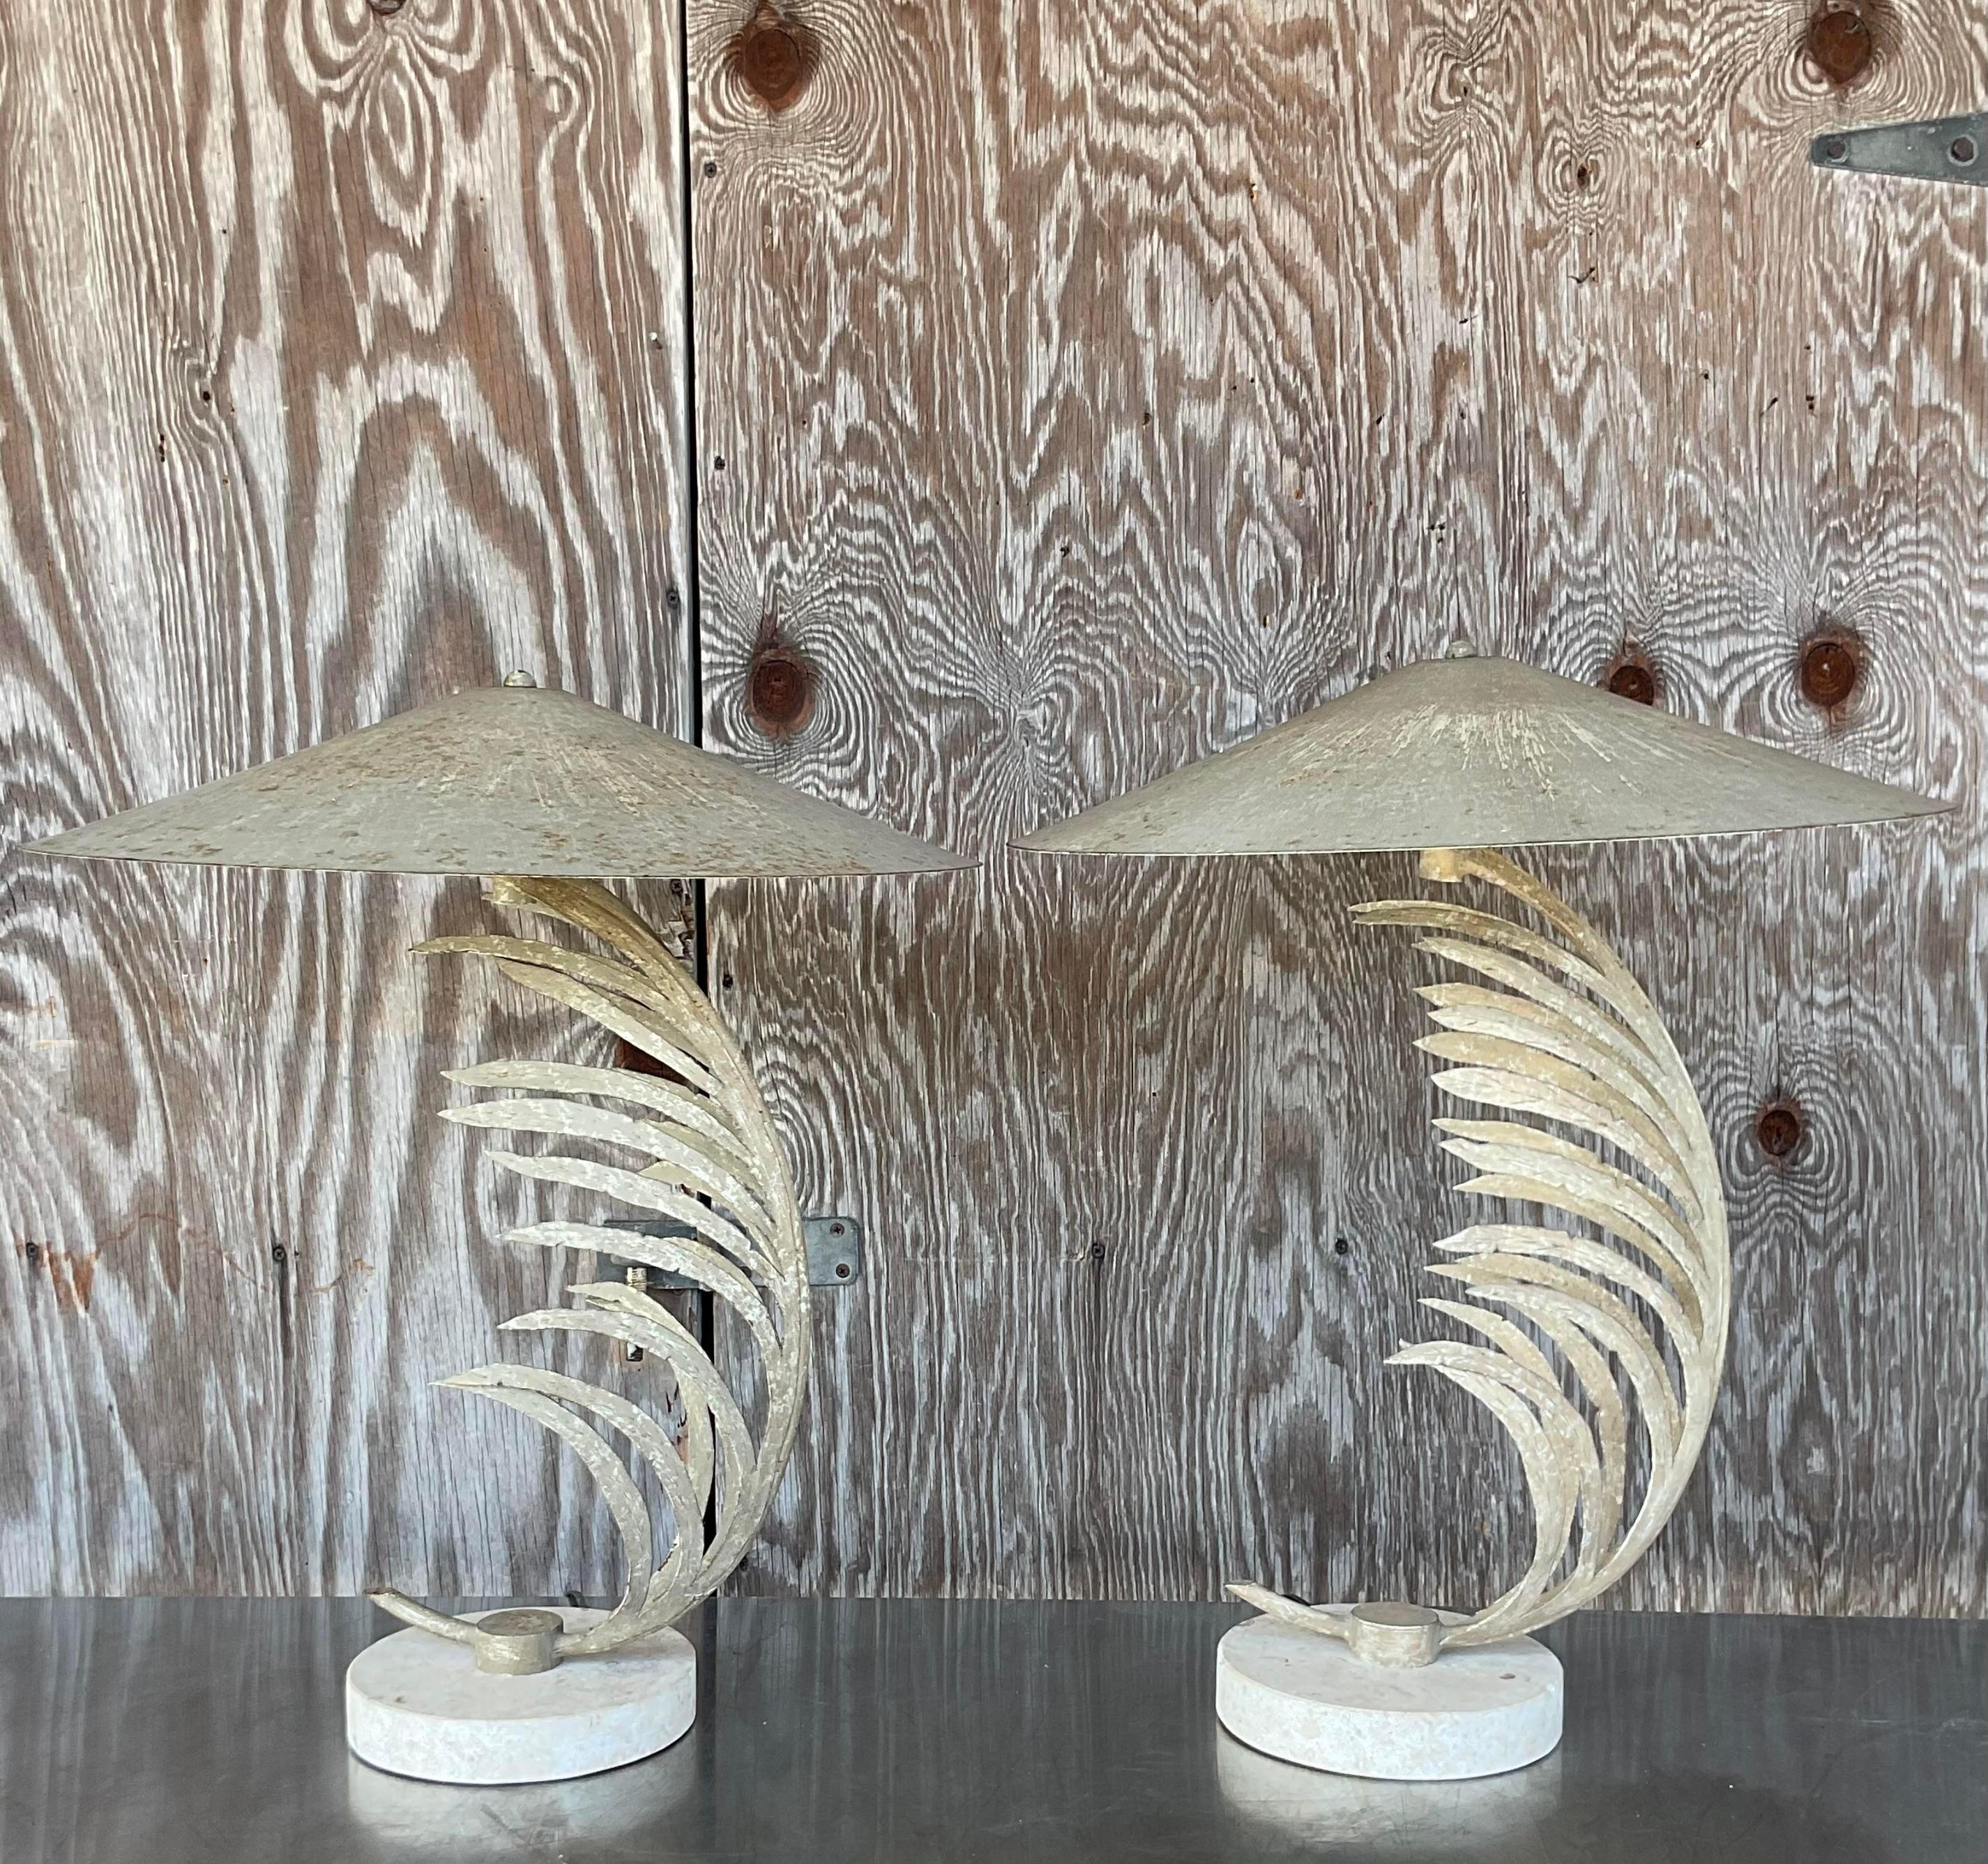 An exceptional pair of vintage Coastal table lamps. The iconic Frond design by Michael Taylor. Beautiful metal fronds that rest on a travertine plinth. Coordinating metal shades. Acquired from a Palm Beach estate.